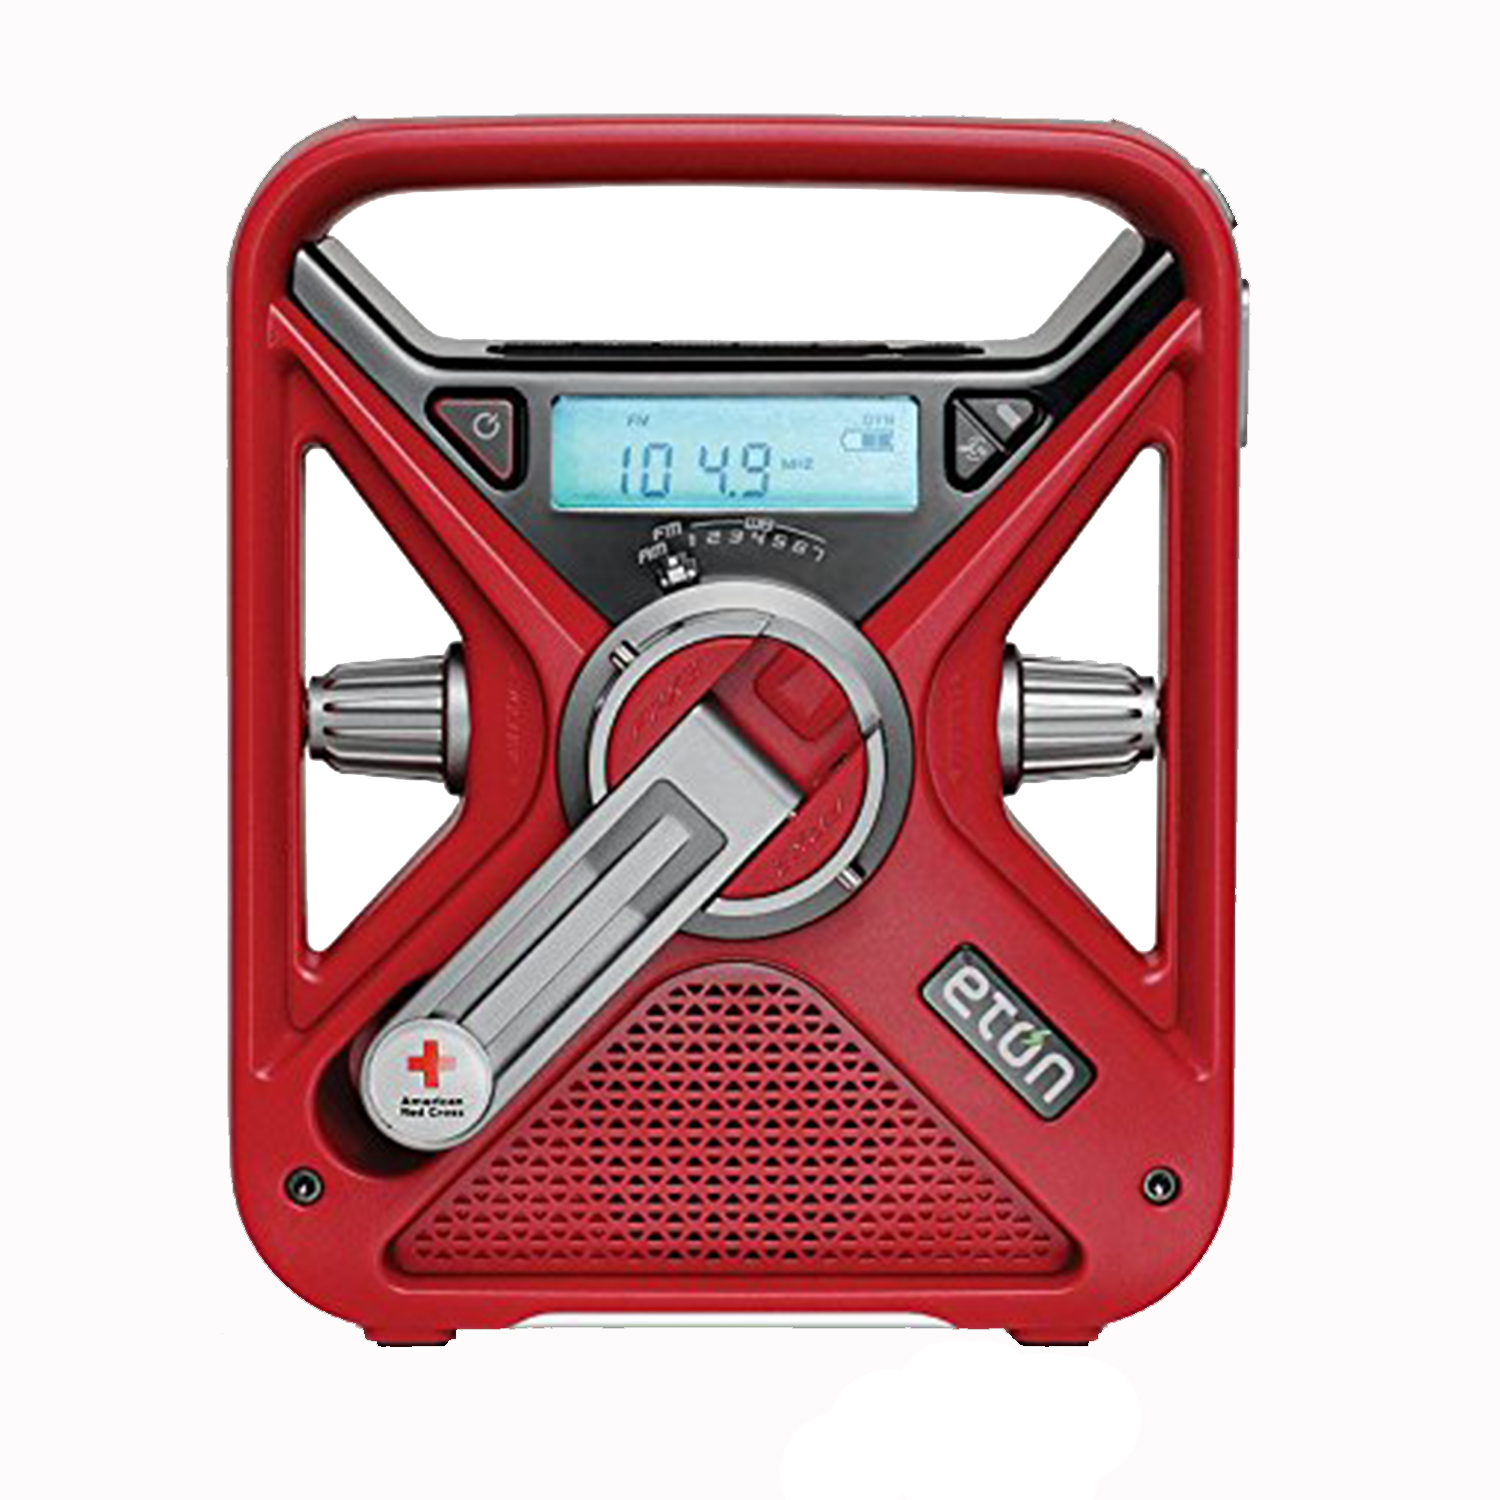 The American Red Cross FRX3 Hand Crank Weather Alert Radio with USB Power - image 1 of 4